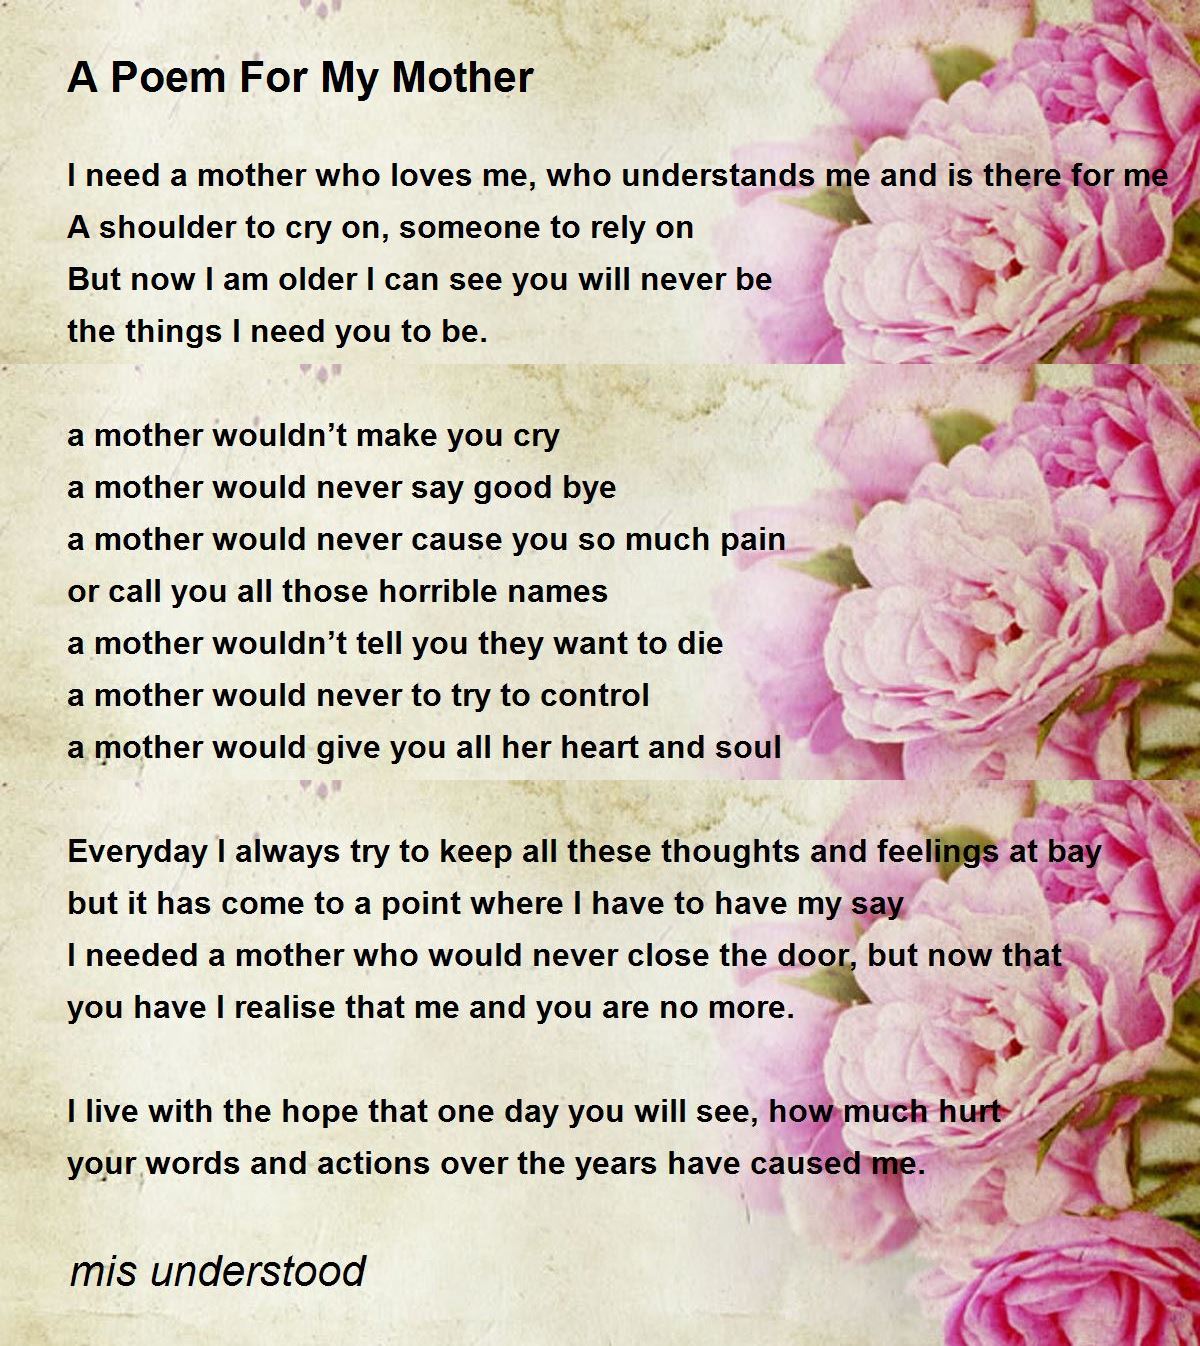 A Poem For My Mother by mis understood - A Poem For My Mother Poem